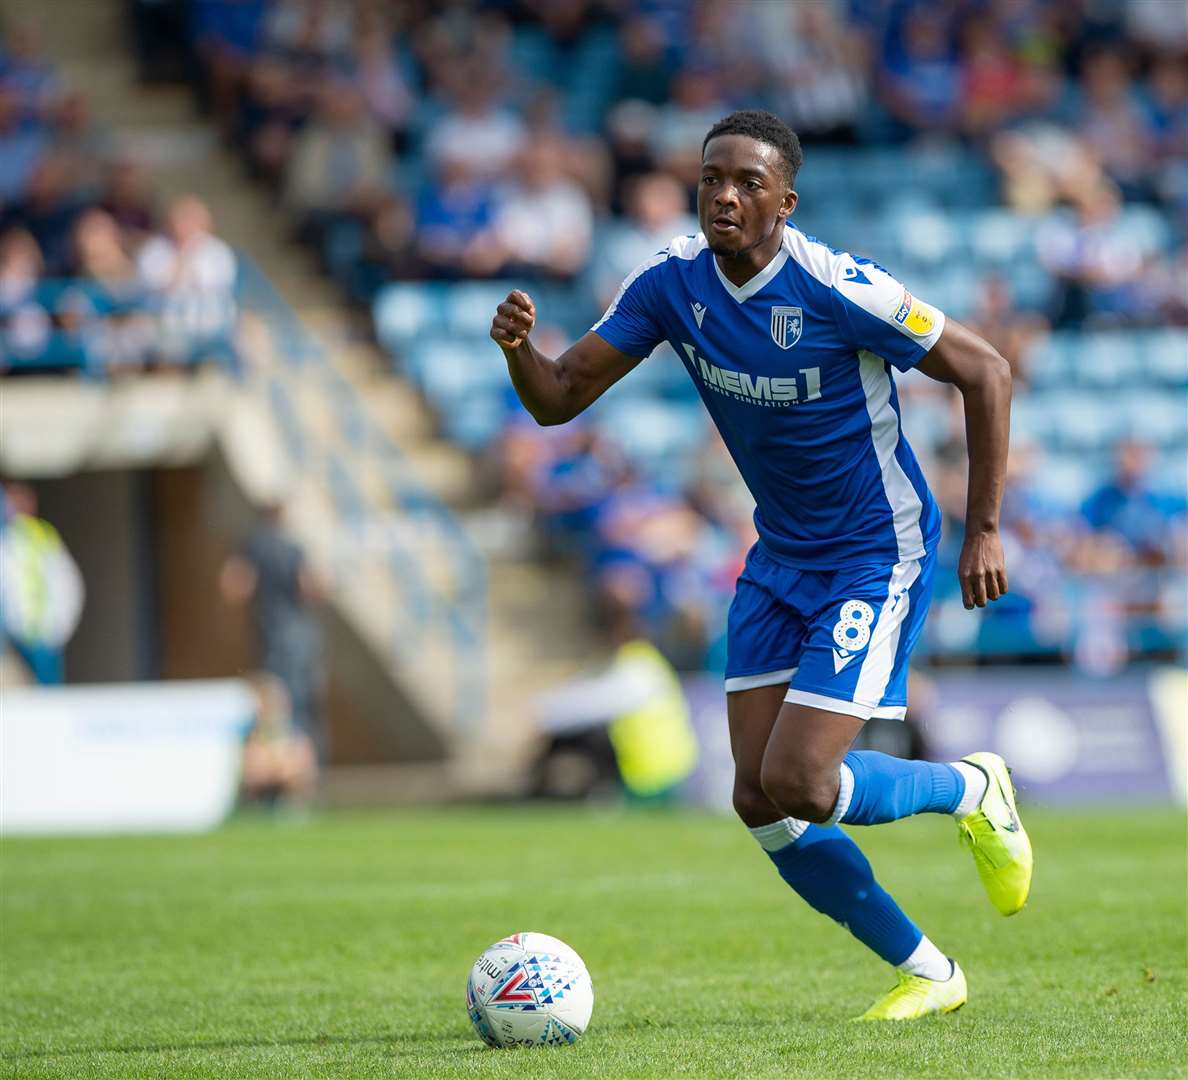 Matty Willock has only played one half of football for the Gills this season